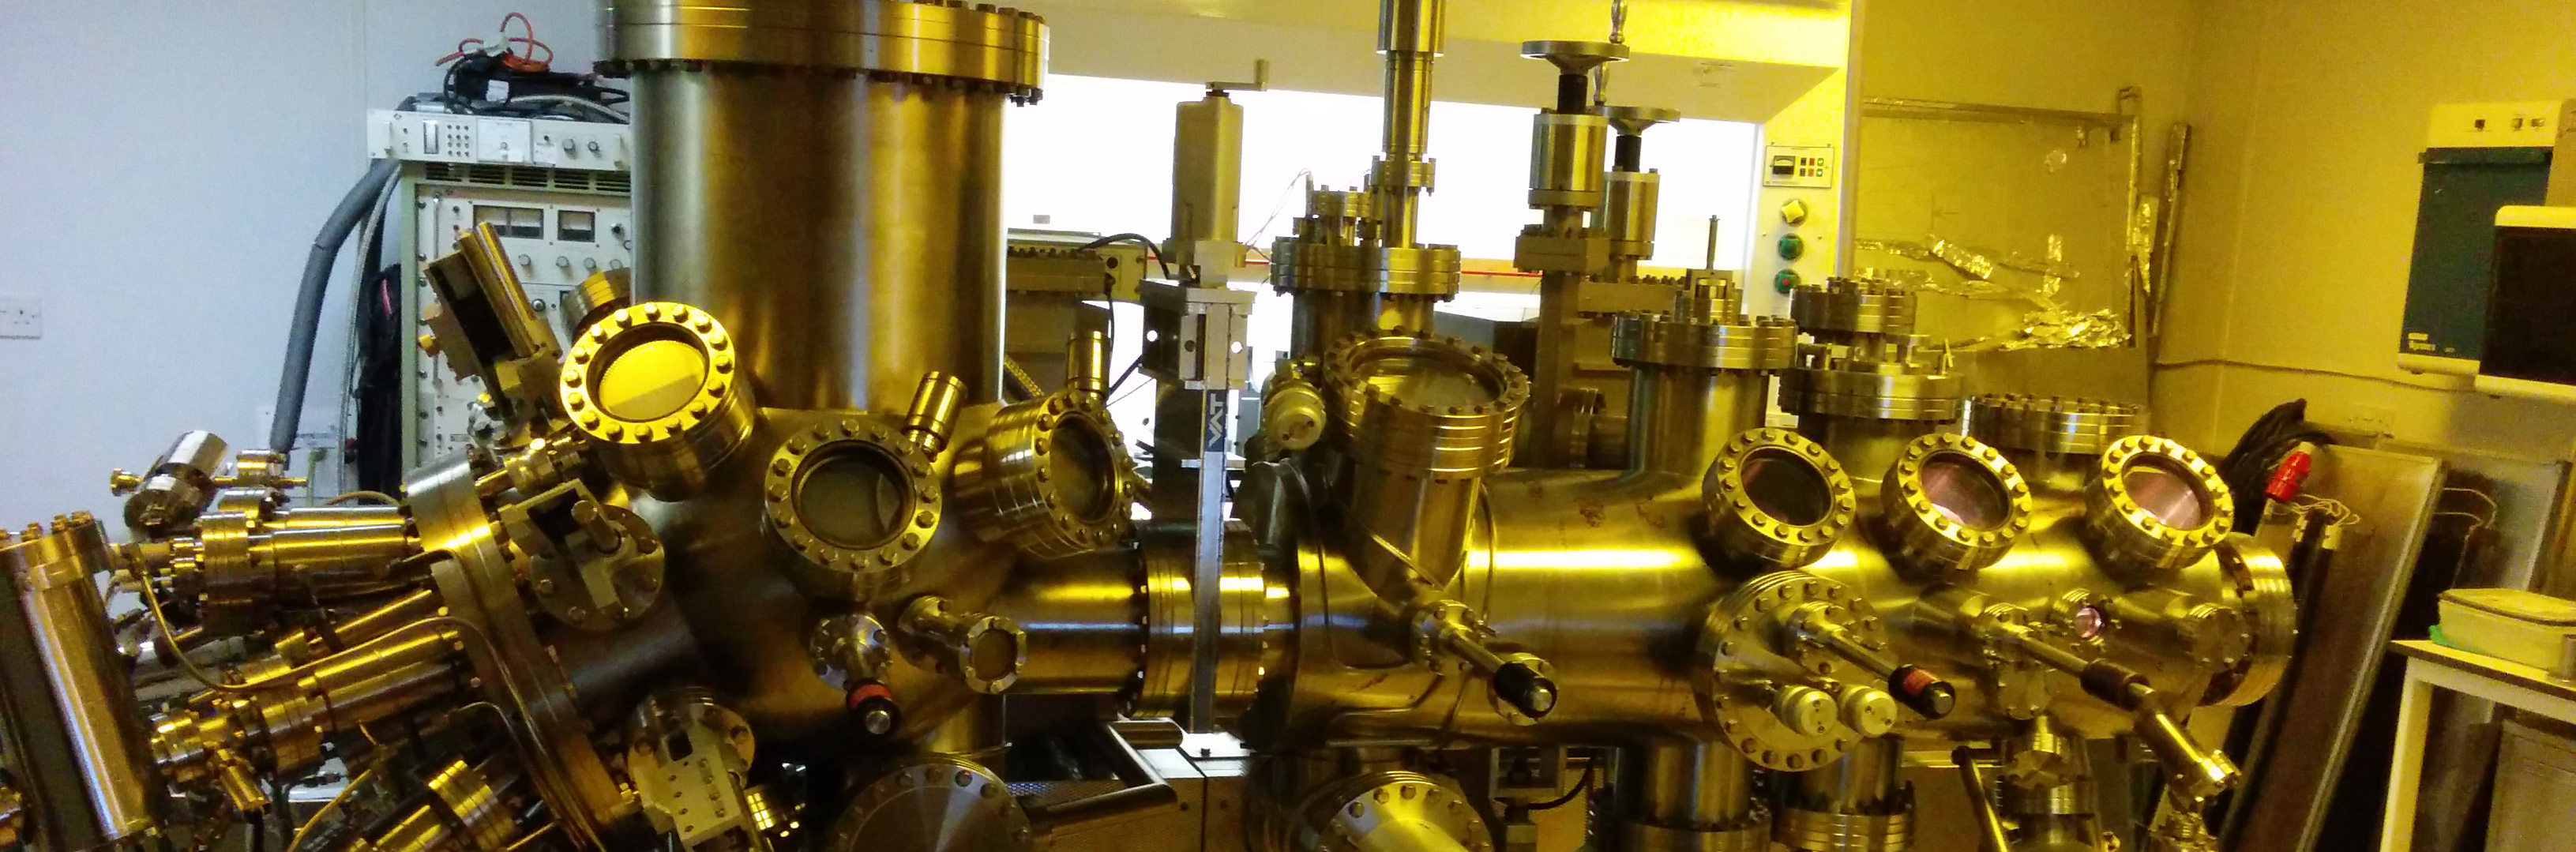 One of the molecular beam epitaxy reactors at Lancaster used to grow quantum rings